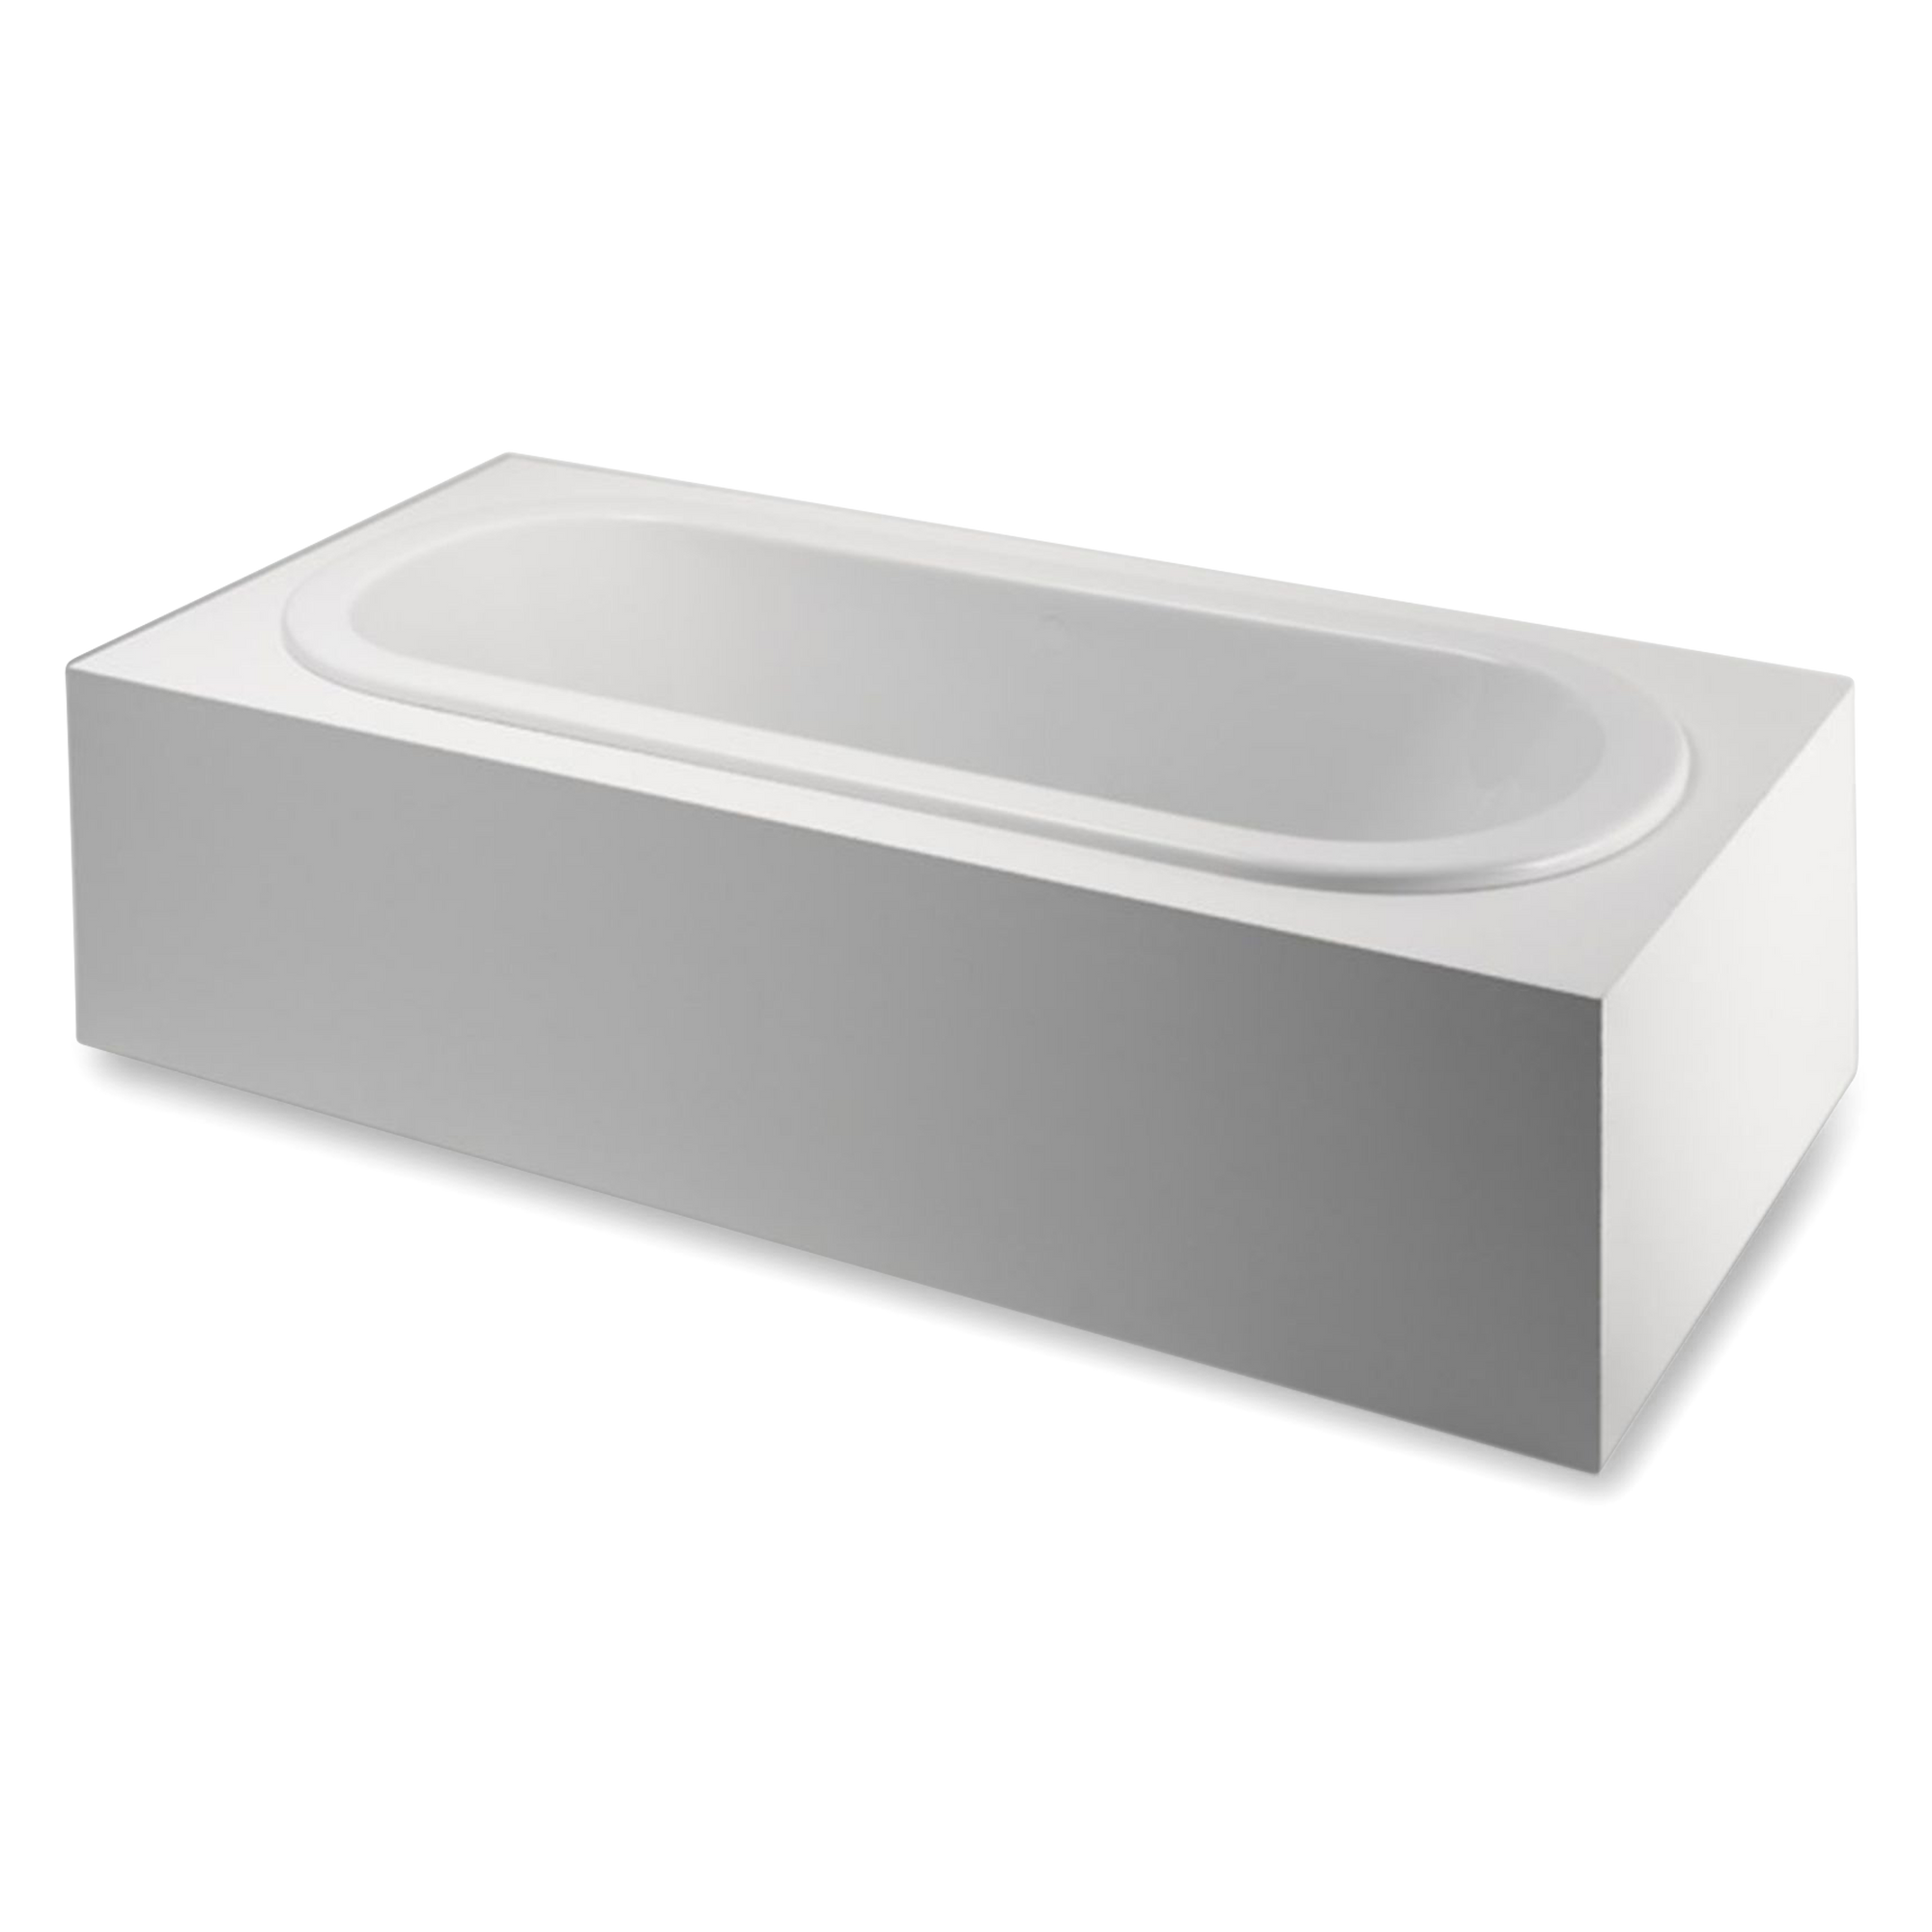 The Classic bathtub is constructed of high-density acrylic with sanitary properties.